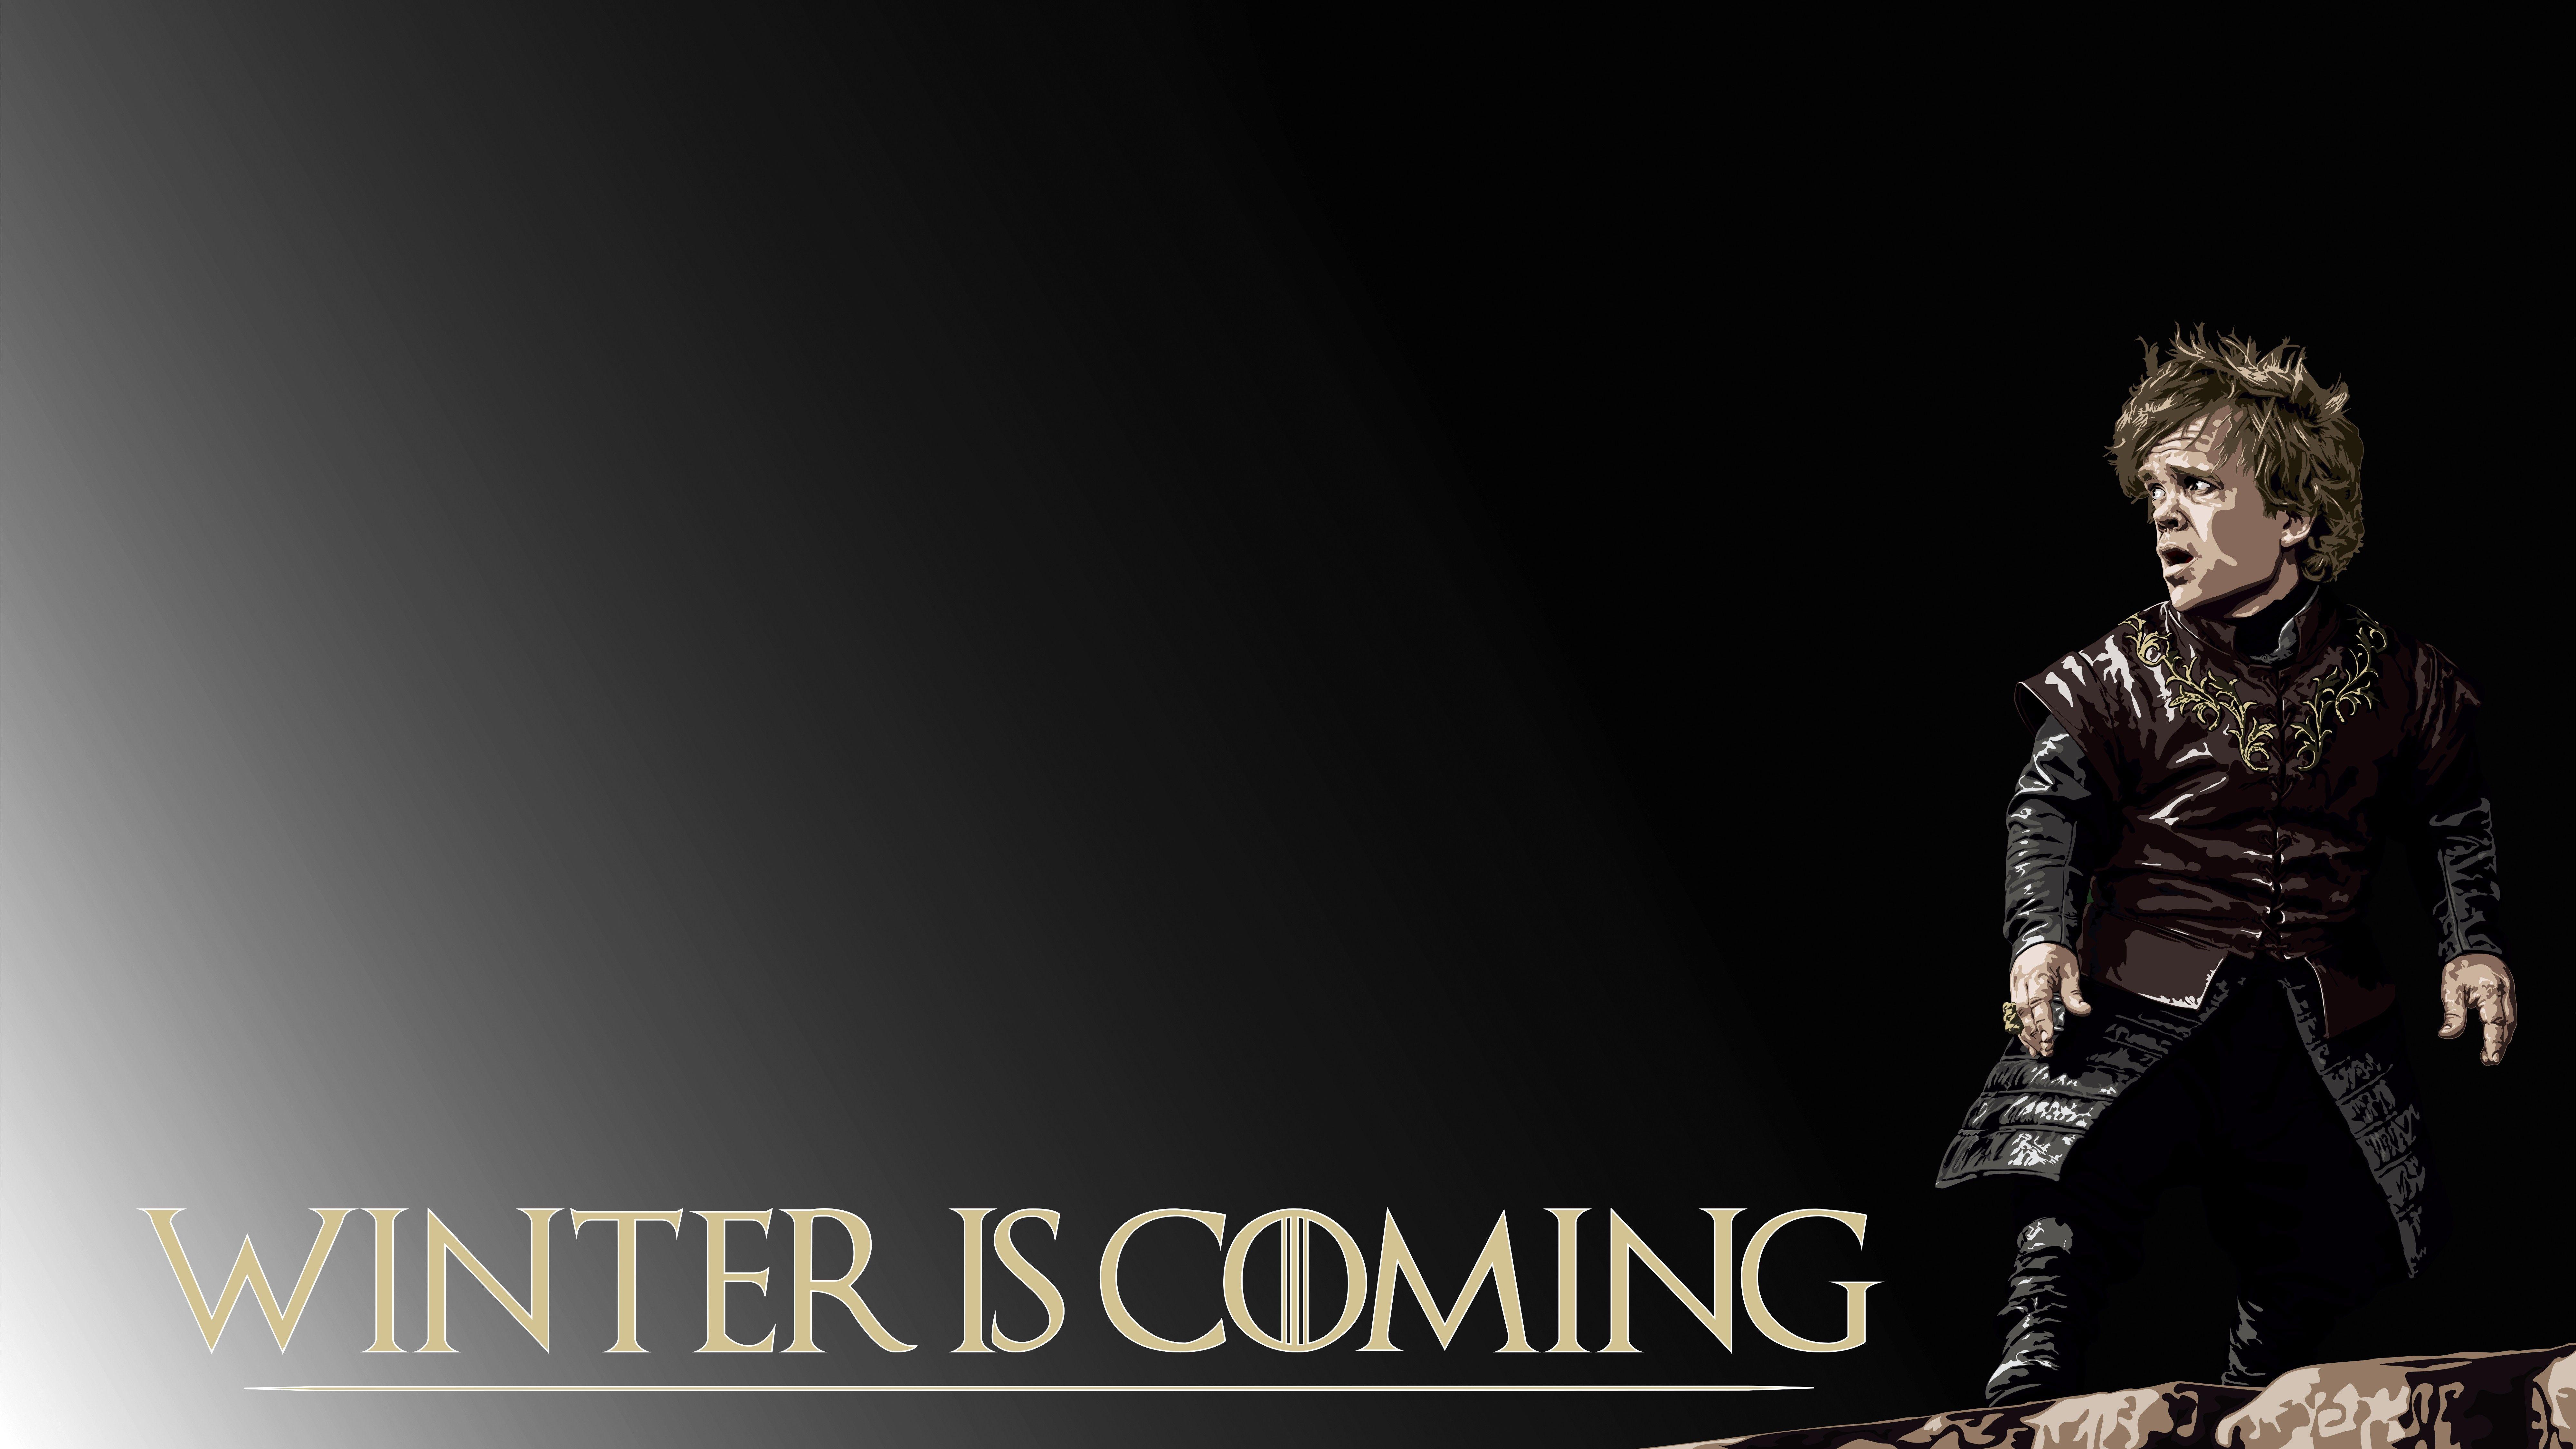 Game Of Thrones, Winter Is Coming, Tyrion Lannister Wallpaper HD